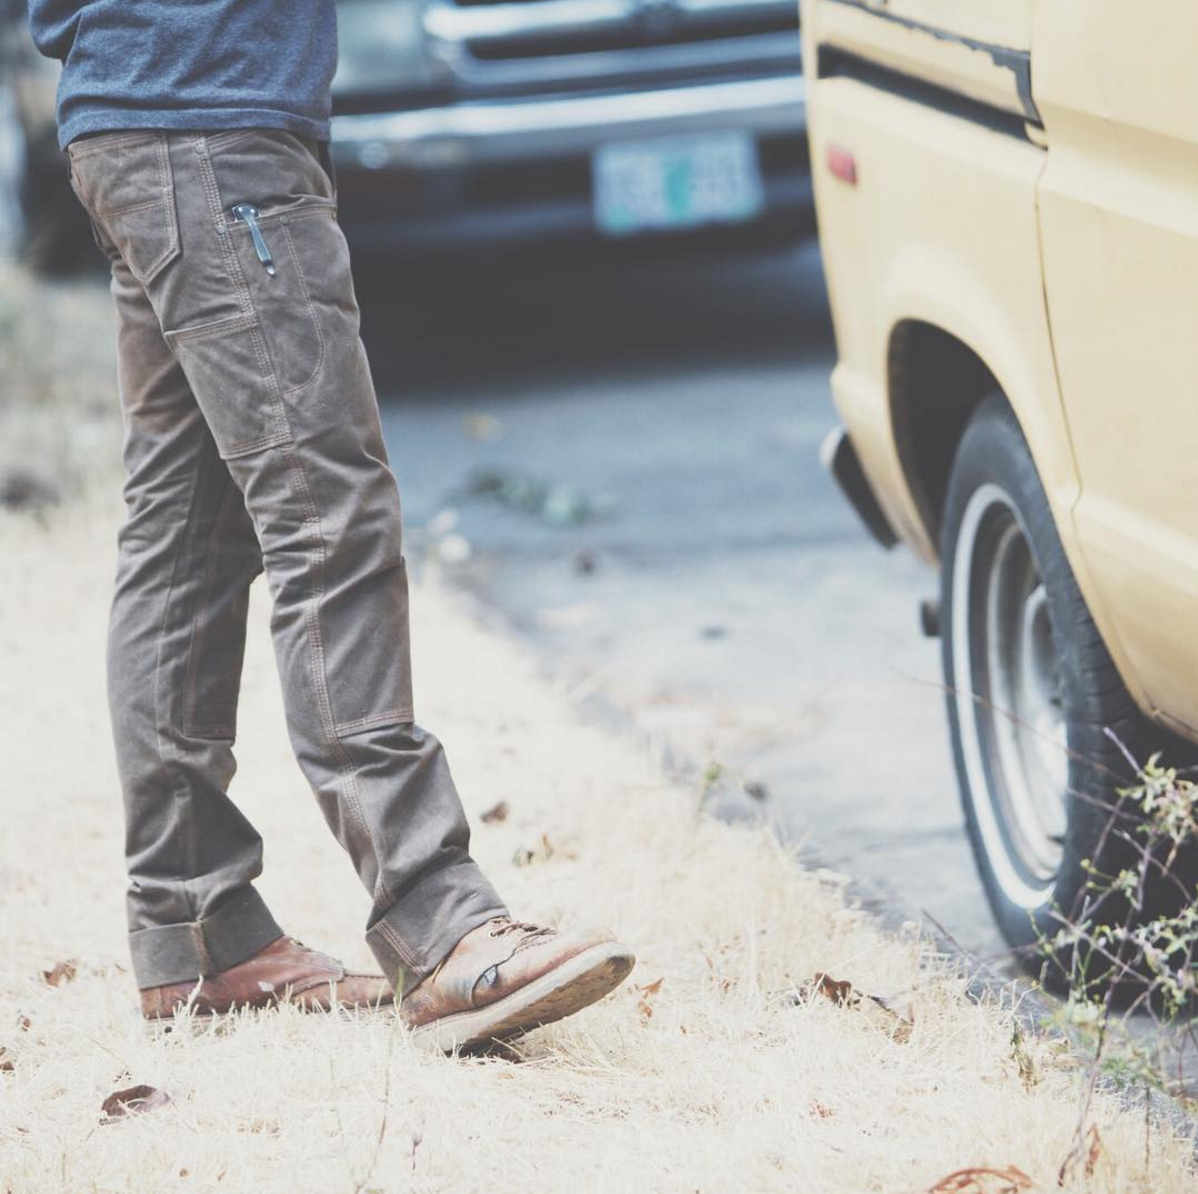 GN.01 Waxed Canvas Fitted Work Pant - Havana - Red Clouds Collective ...